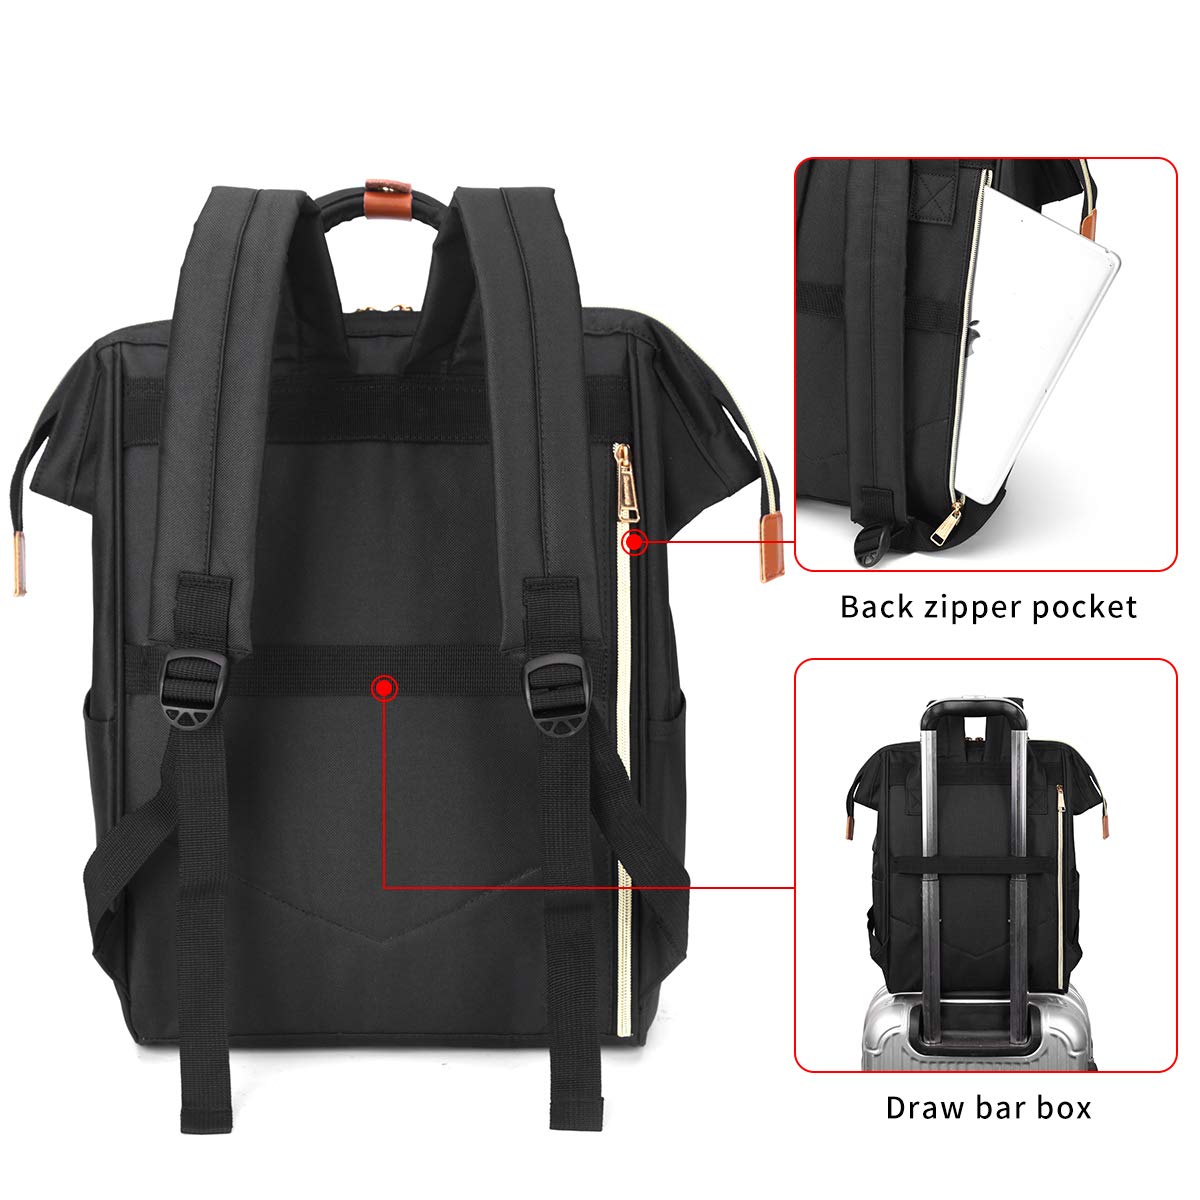 Sowaovut Laptop Backpack 15.6 Inch Casual Daypack Water Resistant Business Travel Backpack for Women men